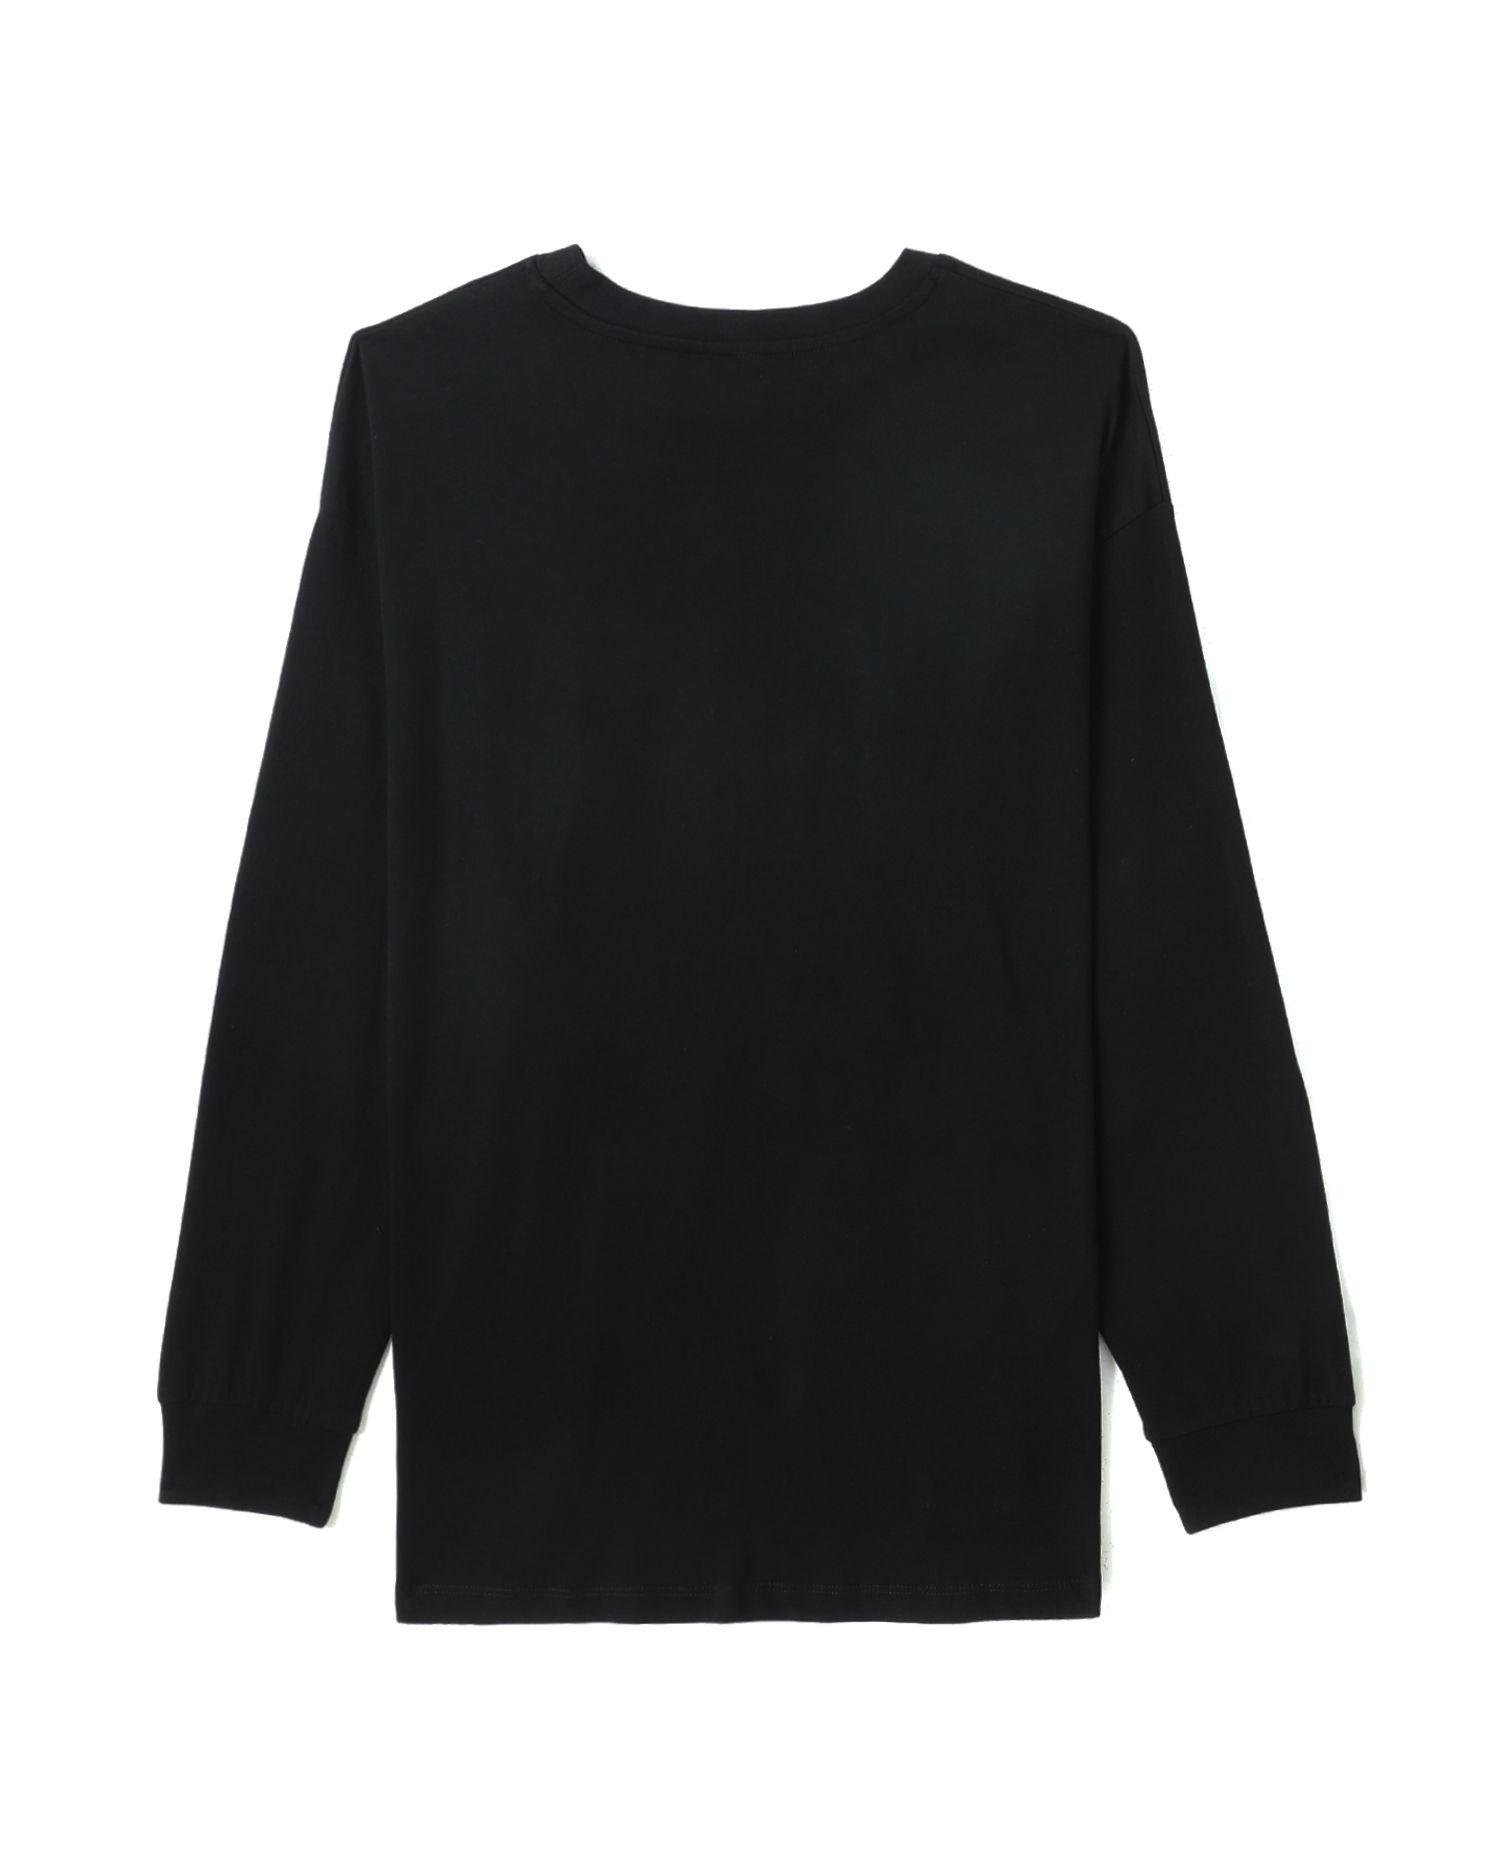 Relaxed long sleeve top by AMERICAN HOLIC